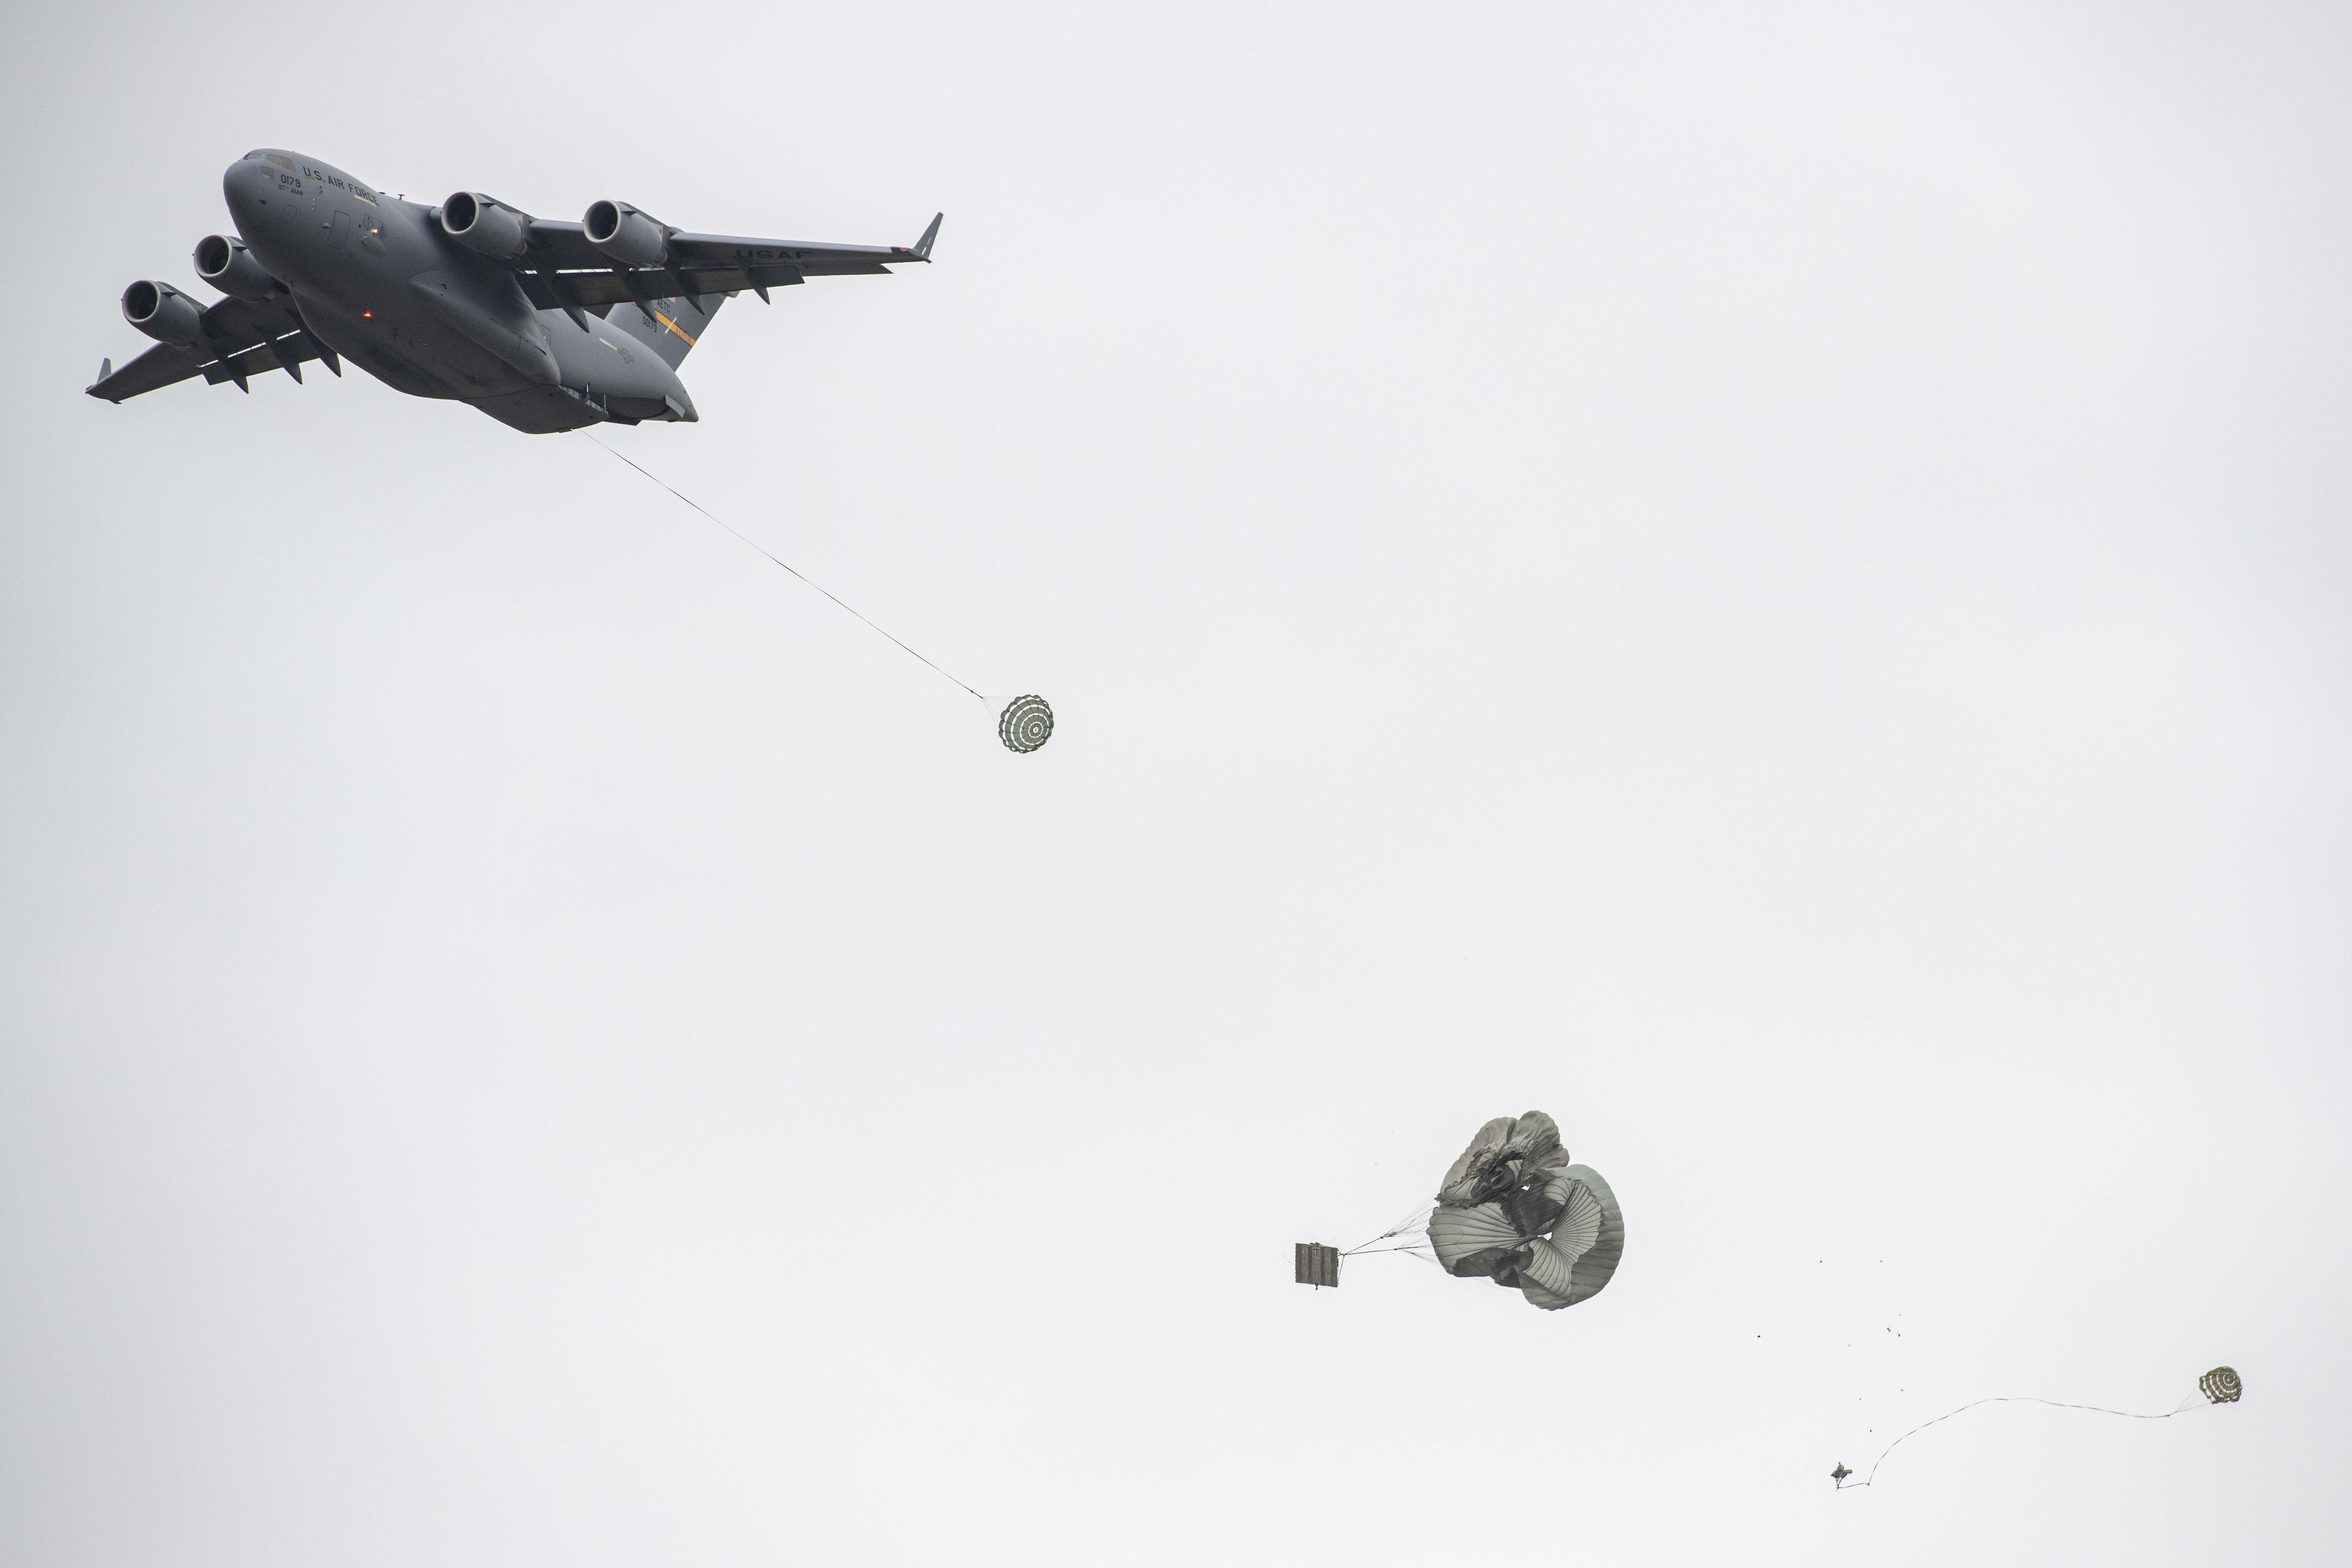 97 LRS continues to support sole C-17 airdrop training mission